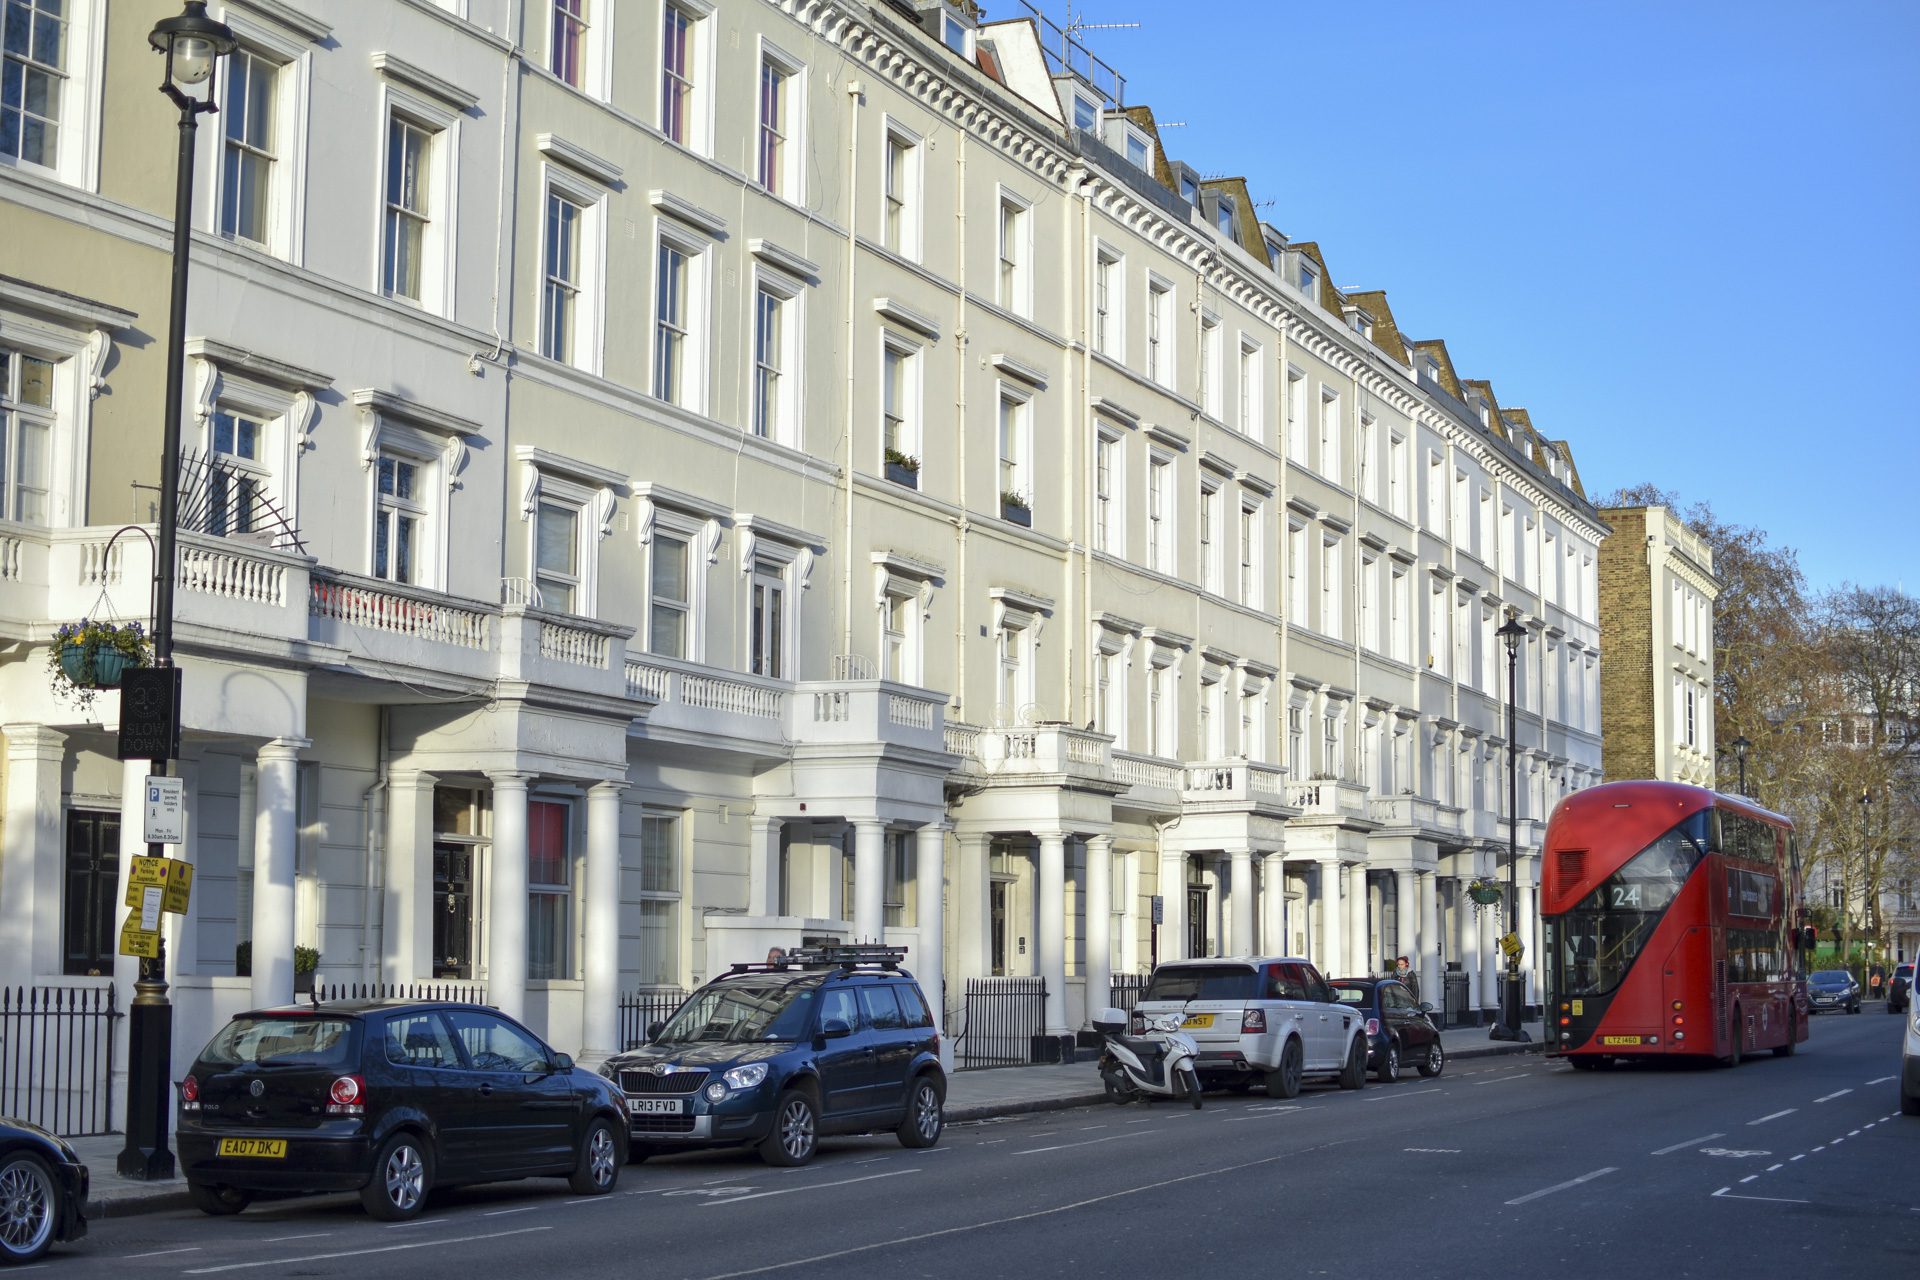 London, UK - February 2 2019: Street view of Lupus street, Pimlico, traditional white townhouses, red London double decker bus driving by, early evening sun -Image